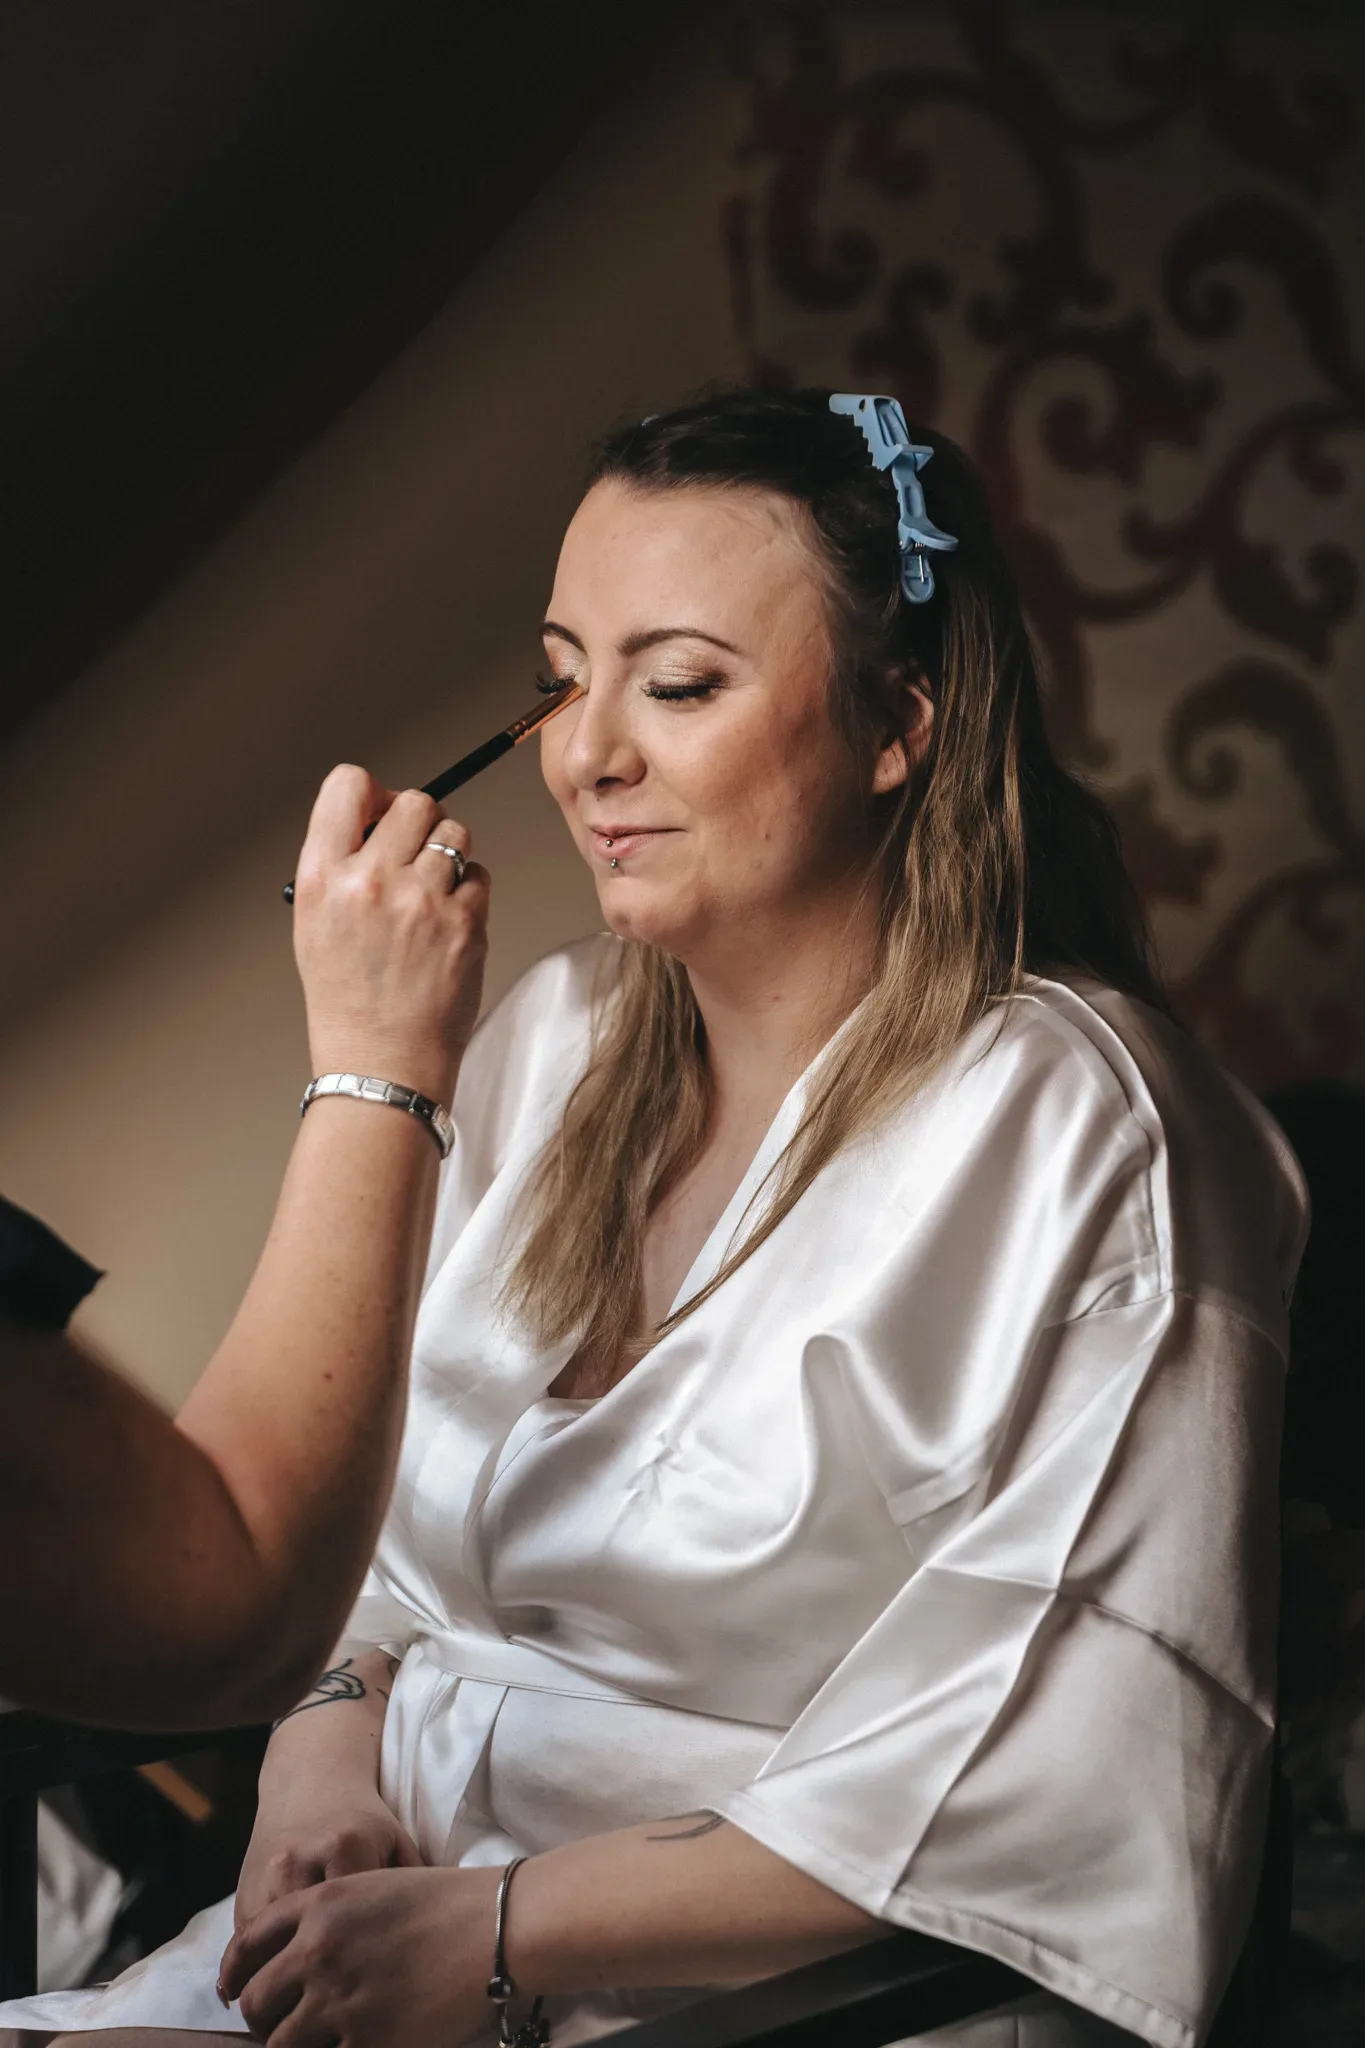 A woman in a white robe sits contentedly as a makeup artist applies eyeshadow, her hair clipped back and a smile hinting on her lips, suggesting a special occasion preparation.